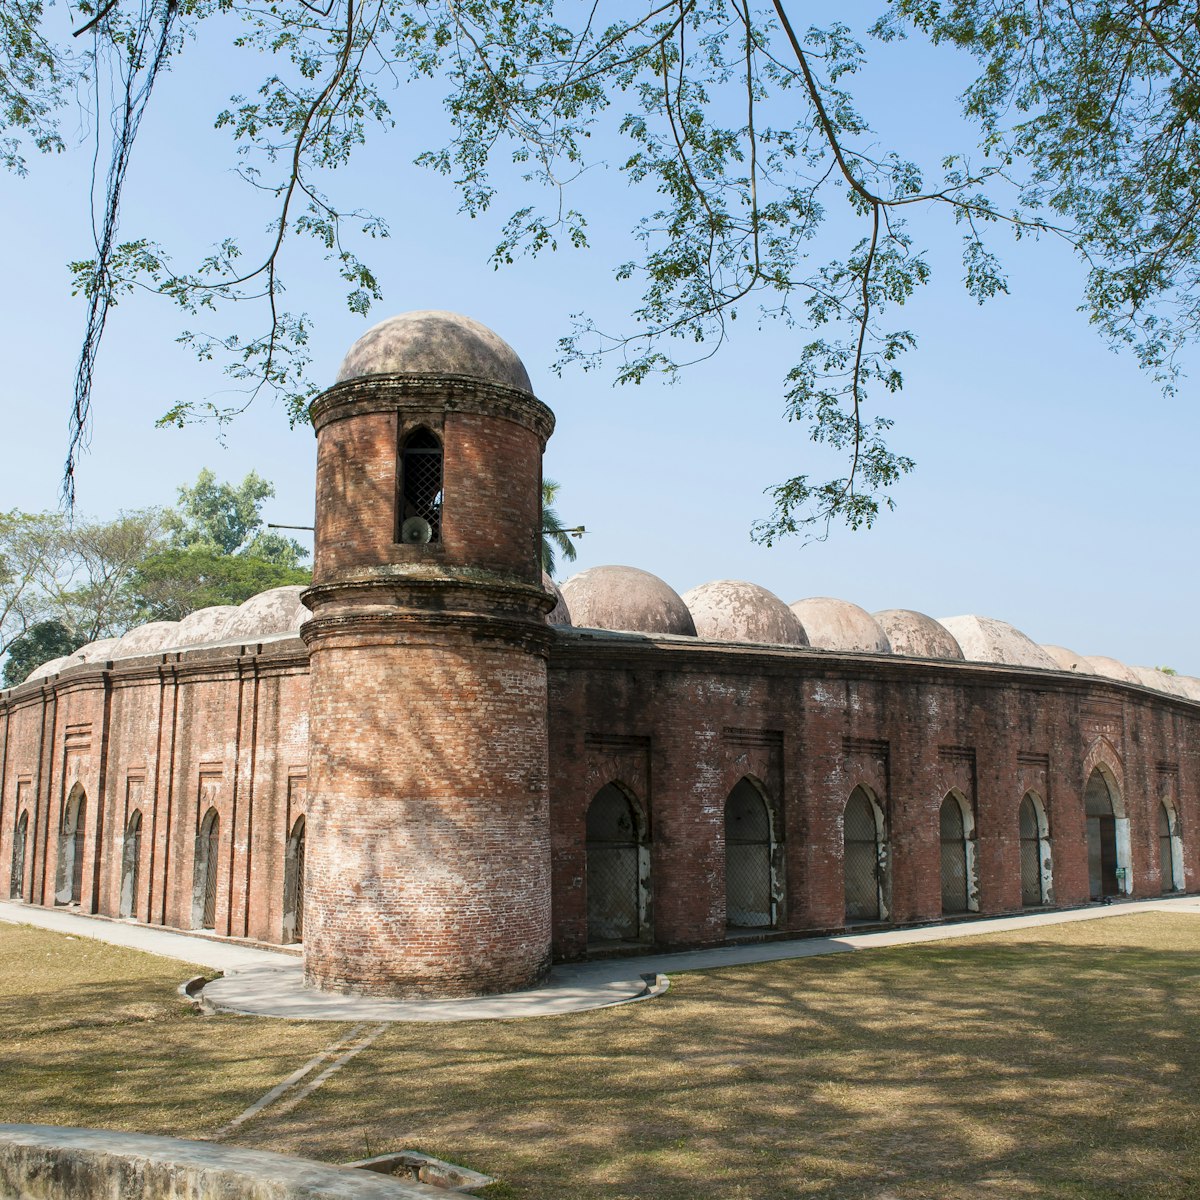 172475612
Antiquities; Asia; bagerhat; Bangladesh; Bangladeshi Culture; Benglalese; Cultures; Famous Place; Shait Gumbad Mosque; Social History; Travel Destinations; History; Horizontal; Islam; UNESCO World Heritage Site; Mosque; No People; Photography; Religion;
Exterior of the Sixty Dome Mosque (Sha Gombuj Moshjid), a UNESCO World Heritage site.